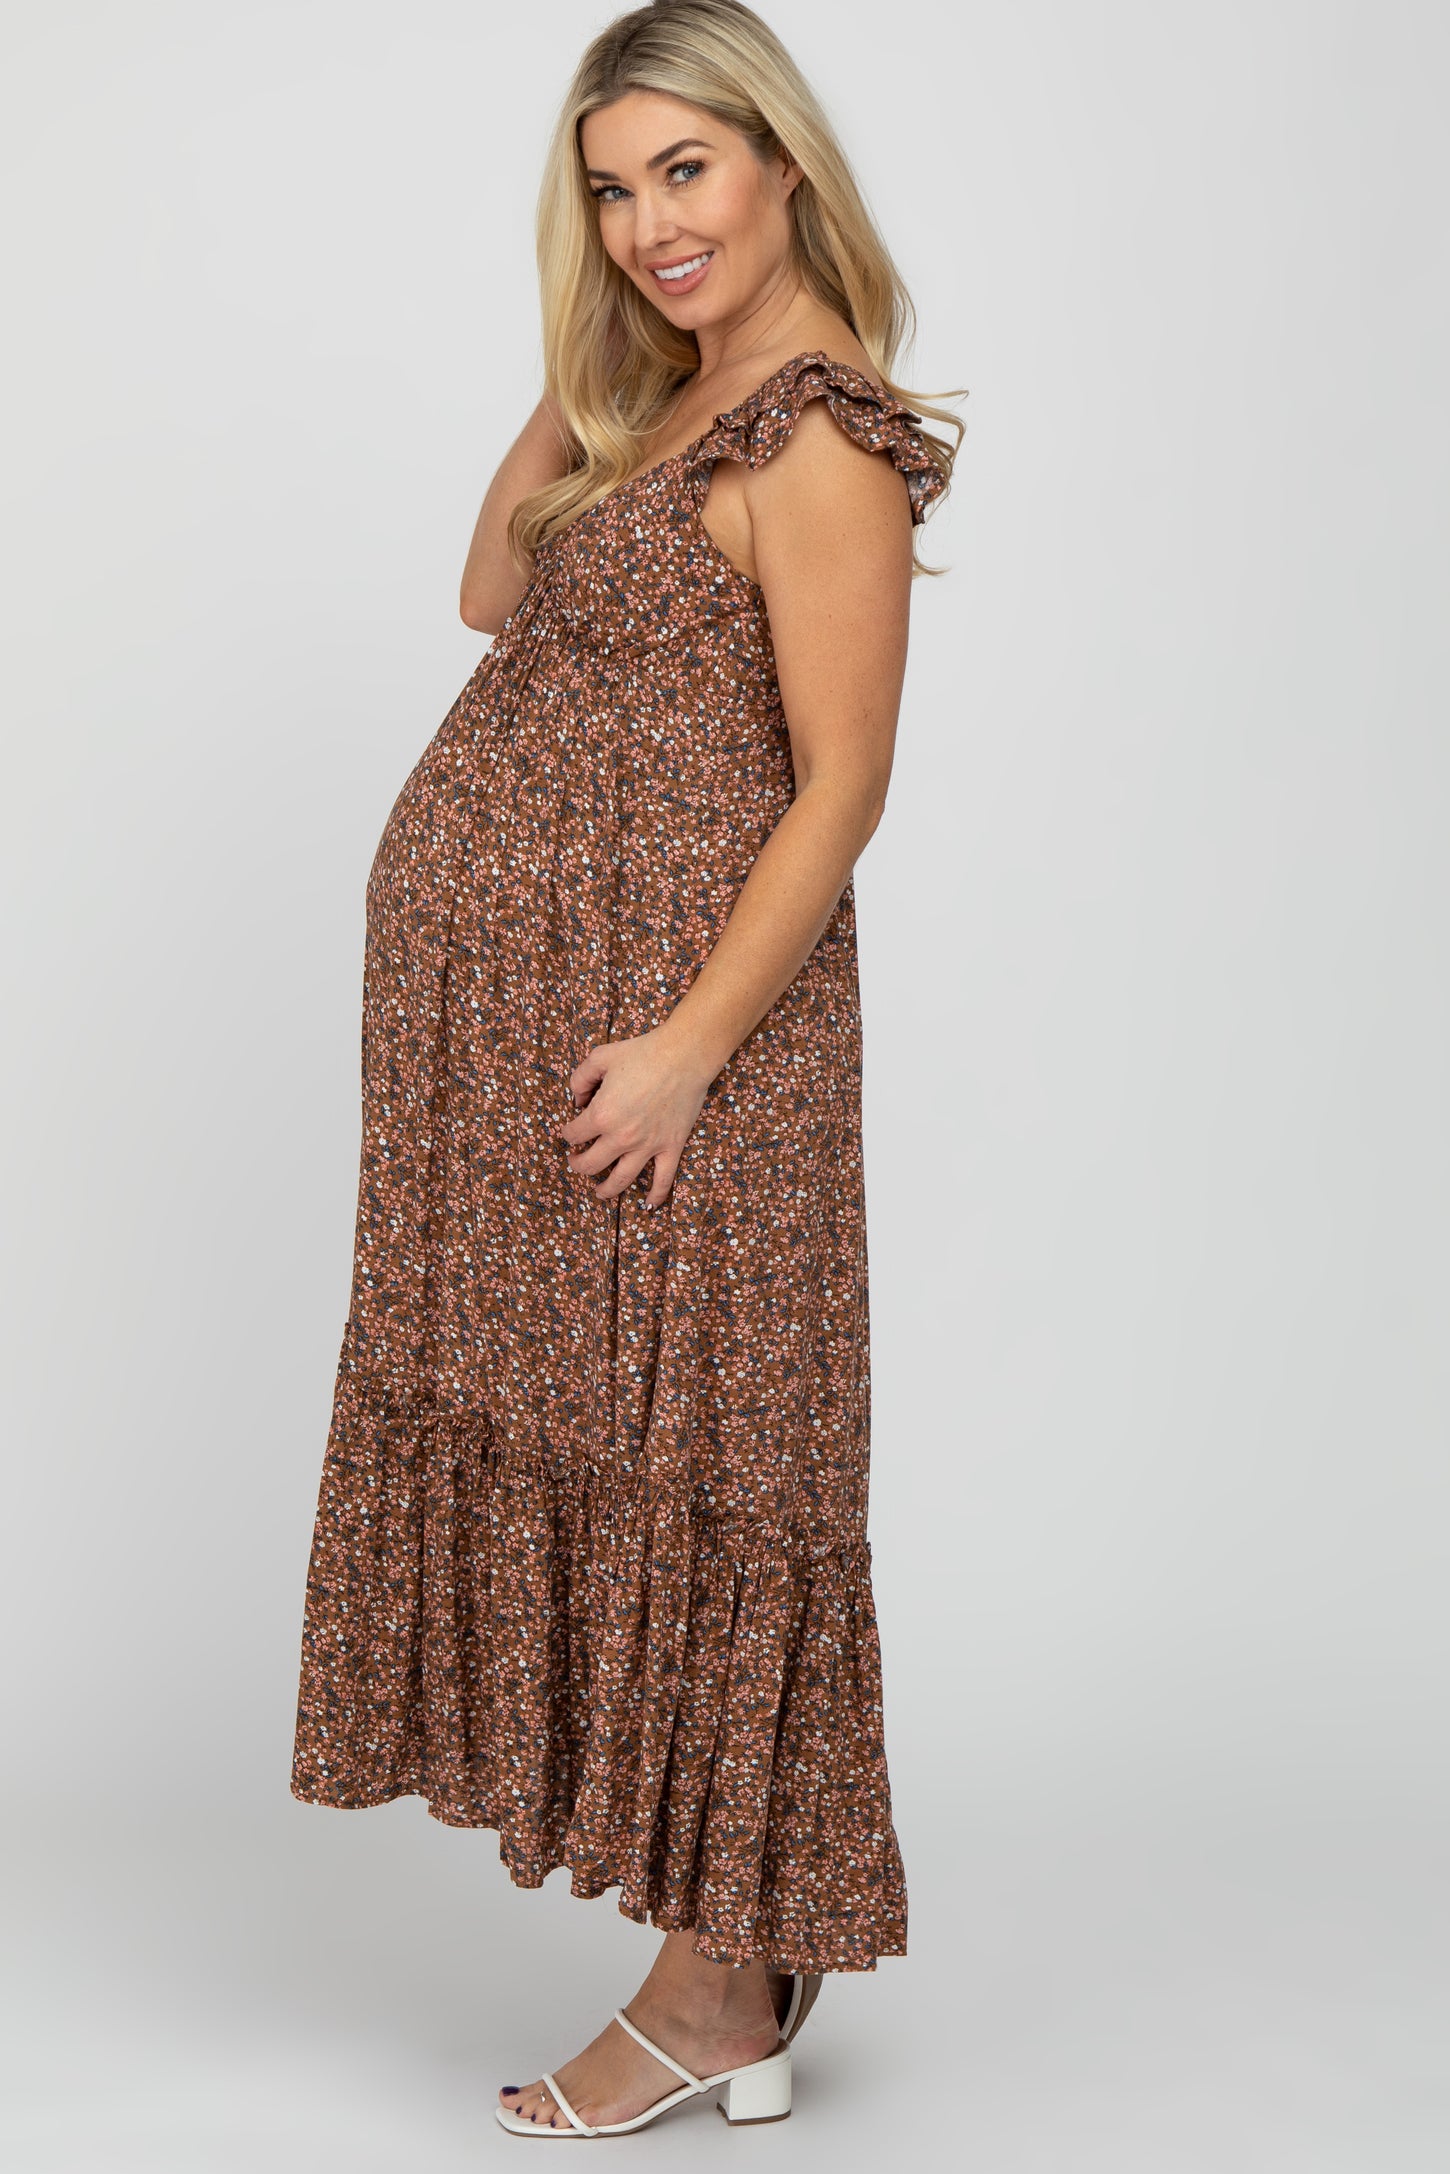 Brown Floral Ruffle Accent Maternity Midi Dress